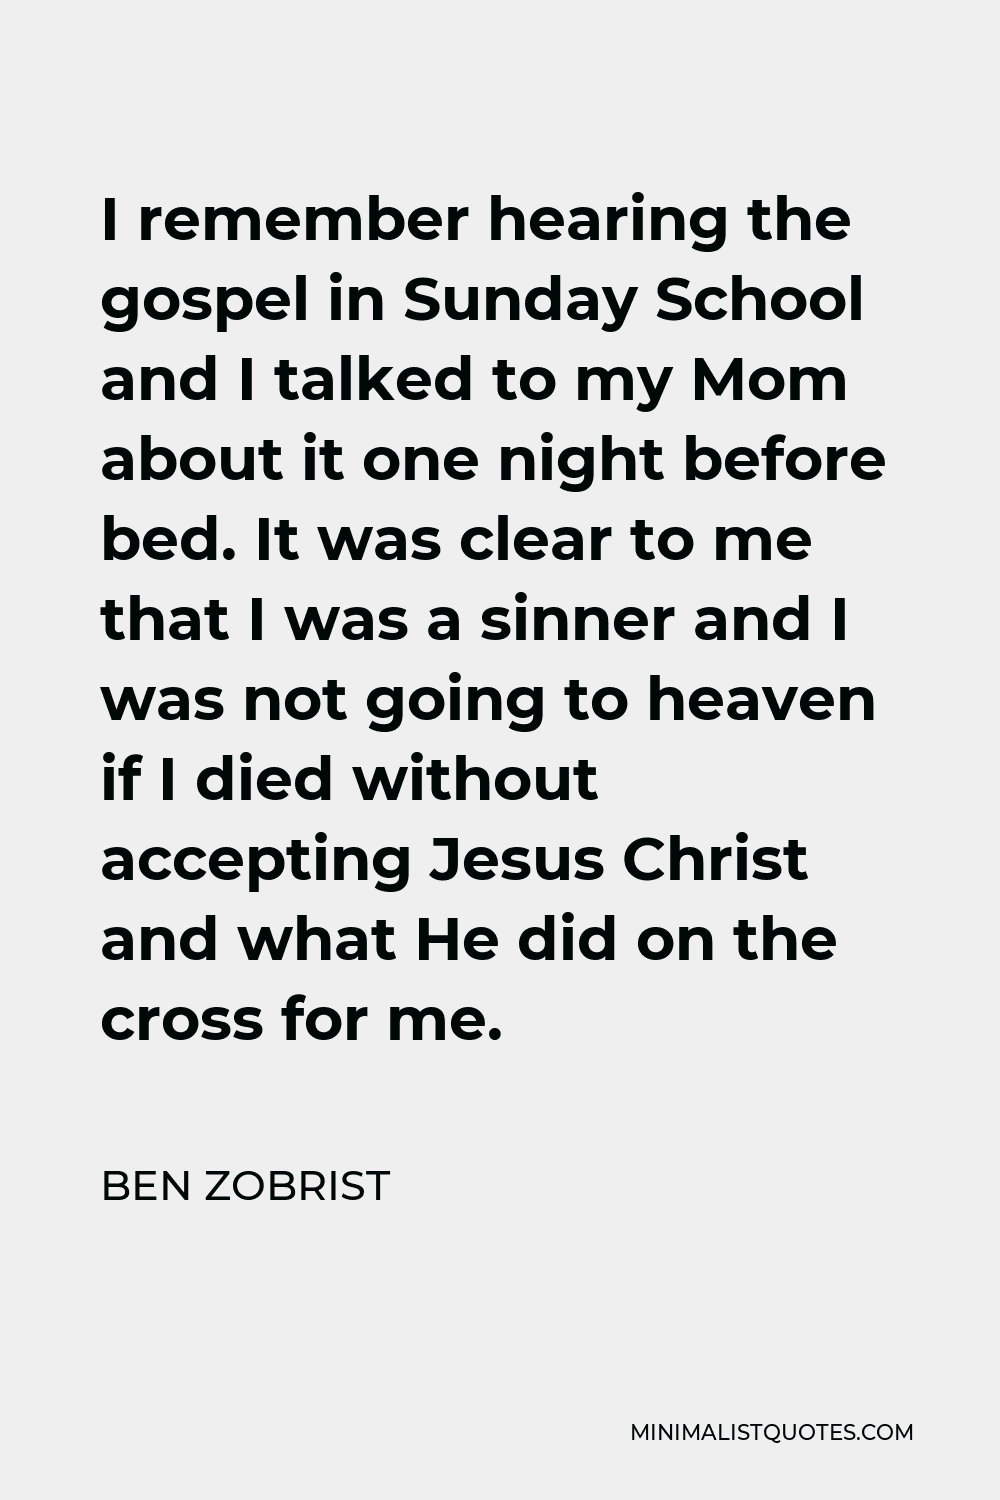 Ben Zobrist Quote - I remember hearing the gospel in Sunday School and I talked to my Mom about it one night before bed. It was clear to me that I was a sinner and I was not going to heaven if I died without accepting Jesus Christ and what He did on the cross for me.